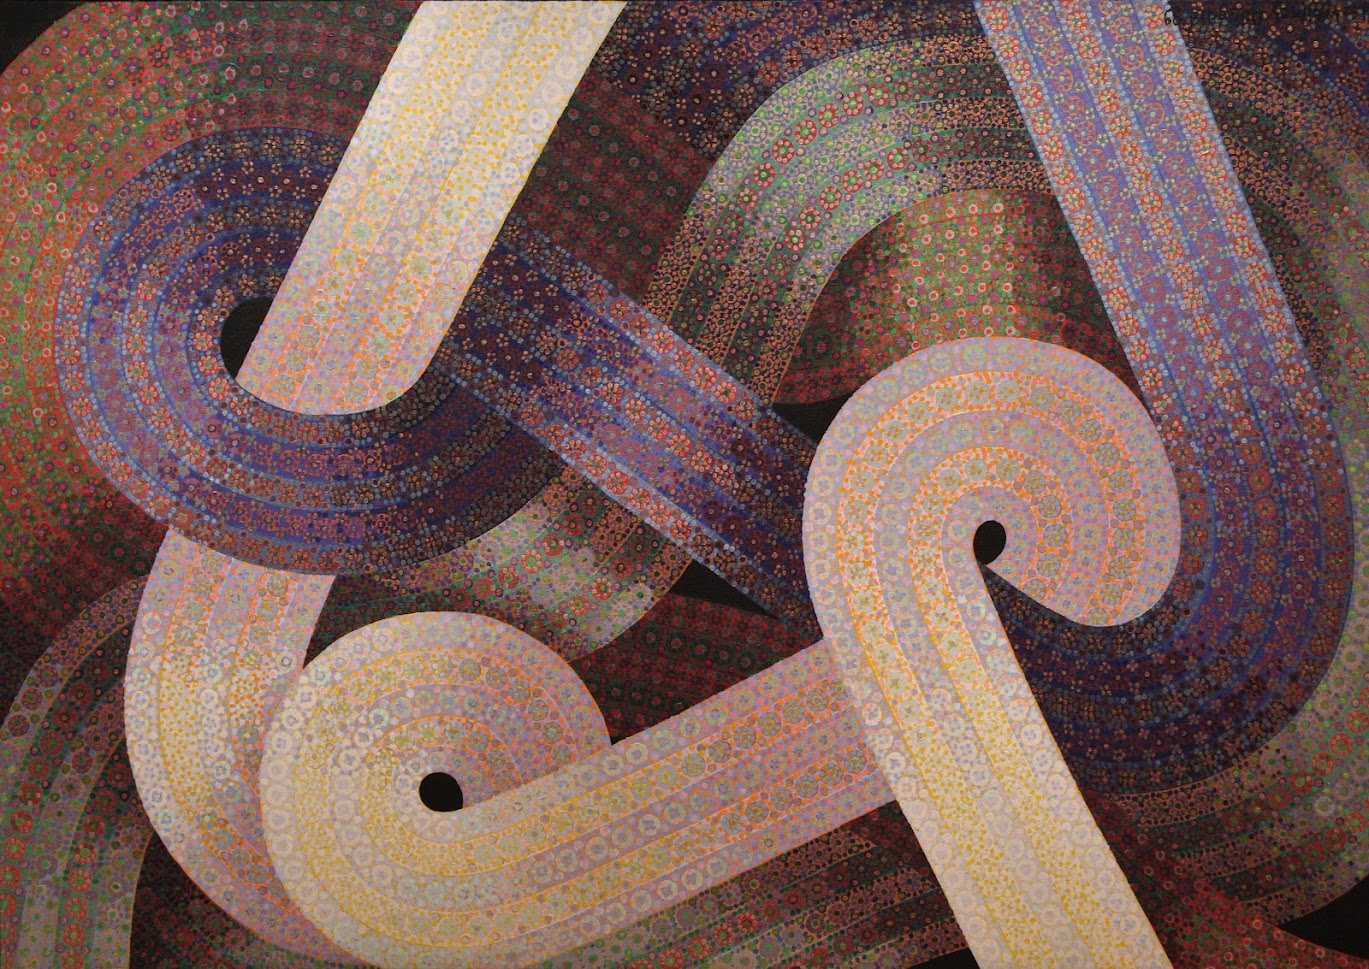 A painting of ribbons in Byzantine style with purples, reds, yellows, and greens. 